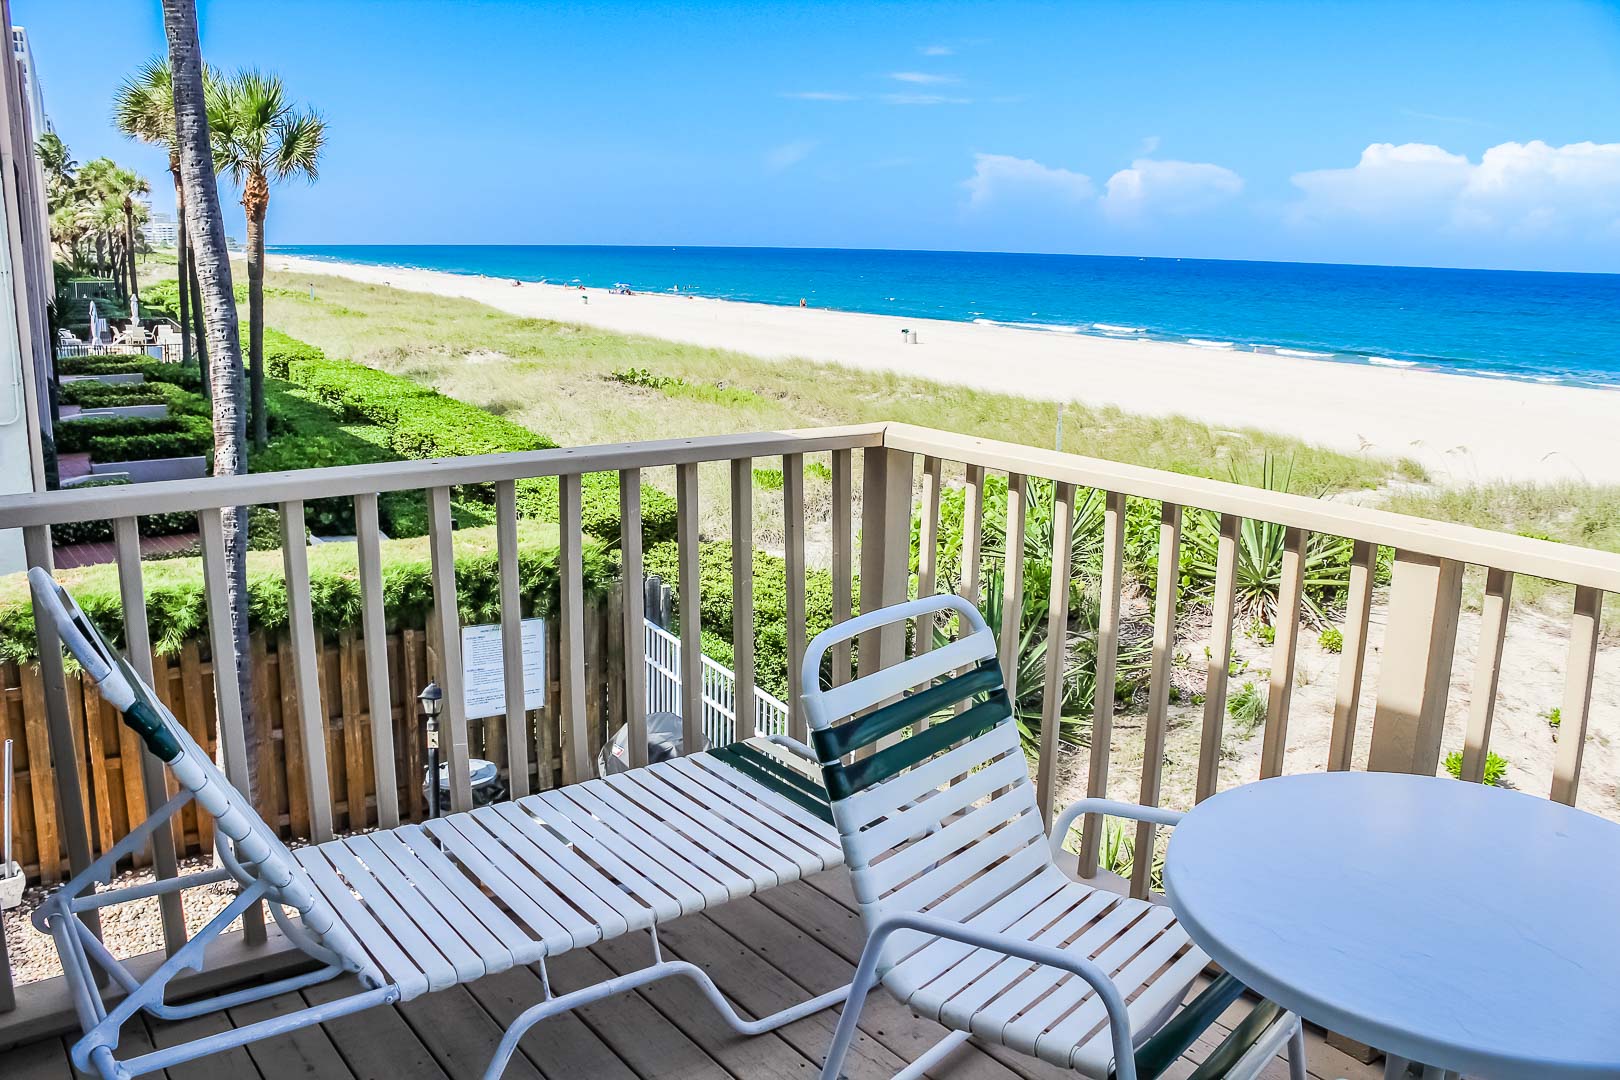 A relaxing balcony deck with a beach view at VRI's Berkshire Beach Club in Florida